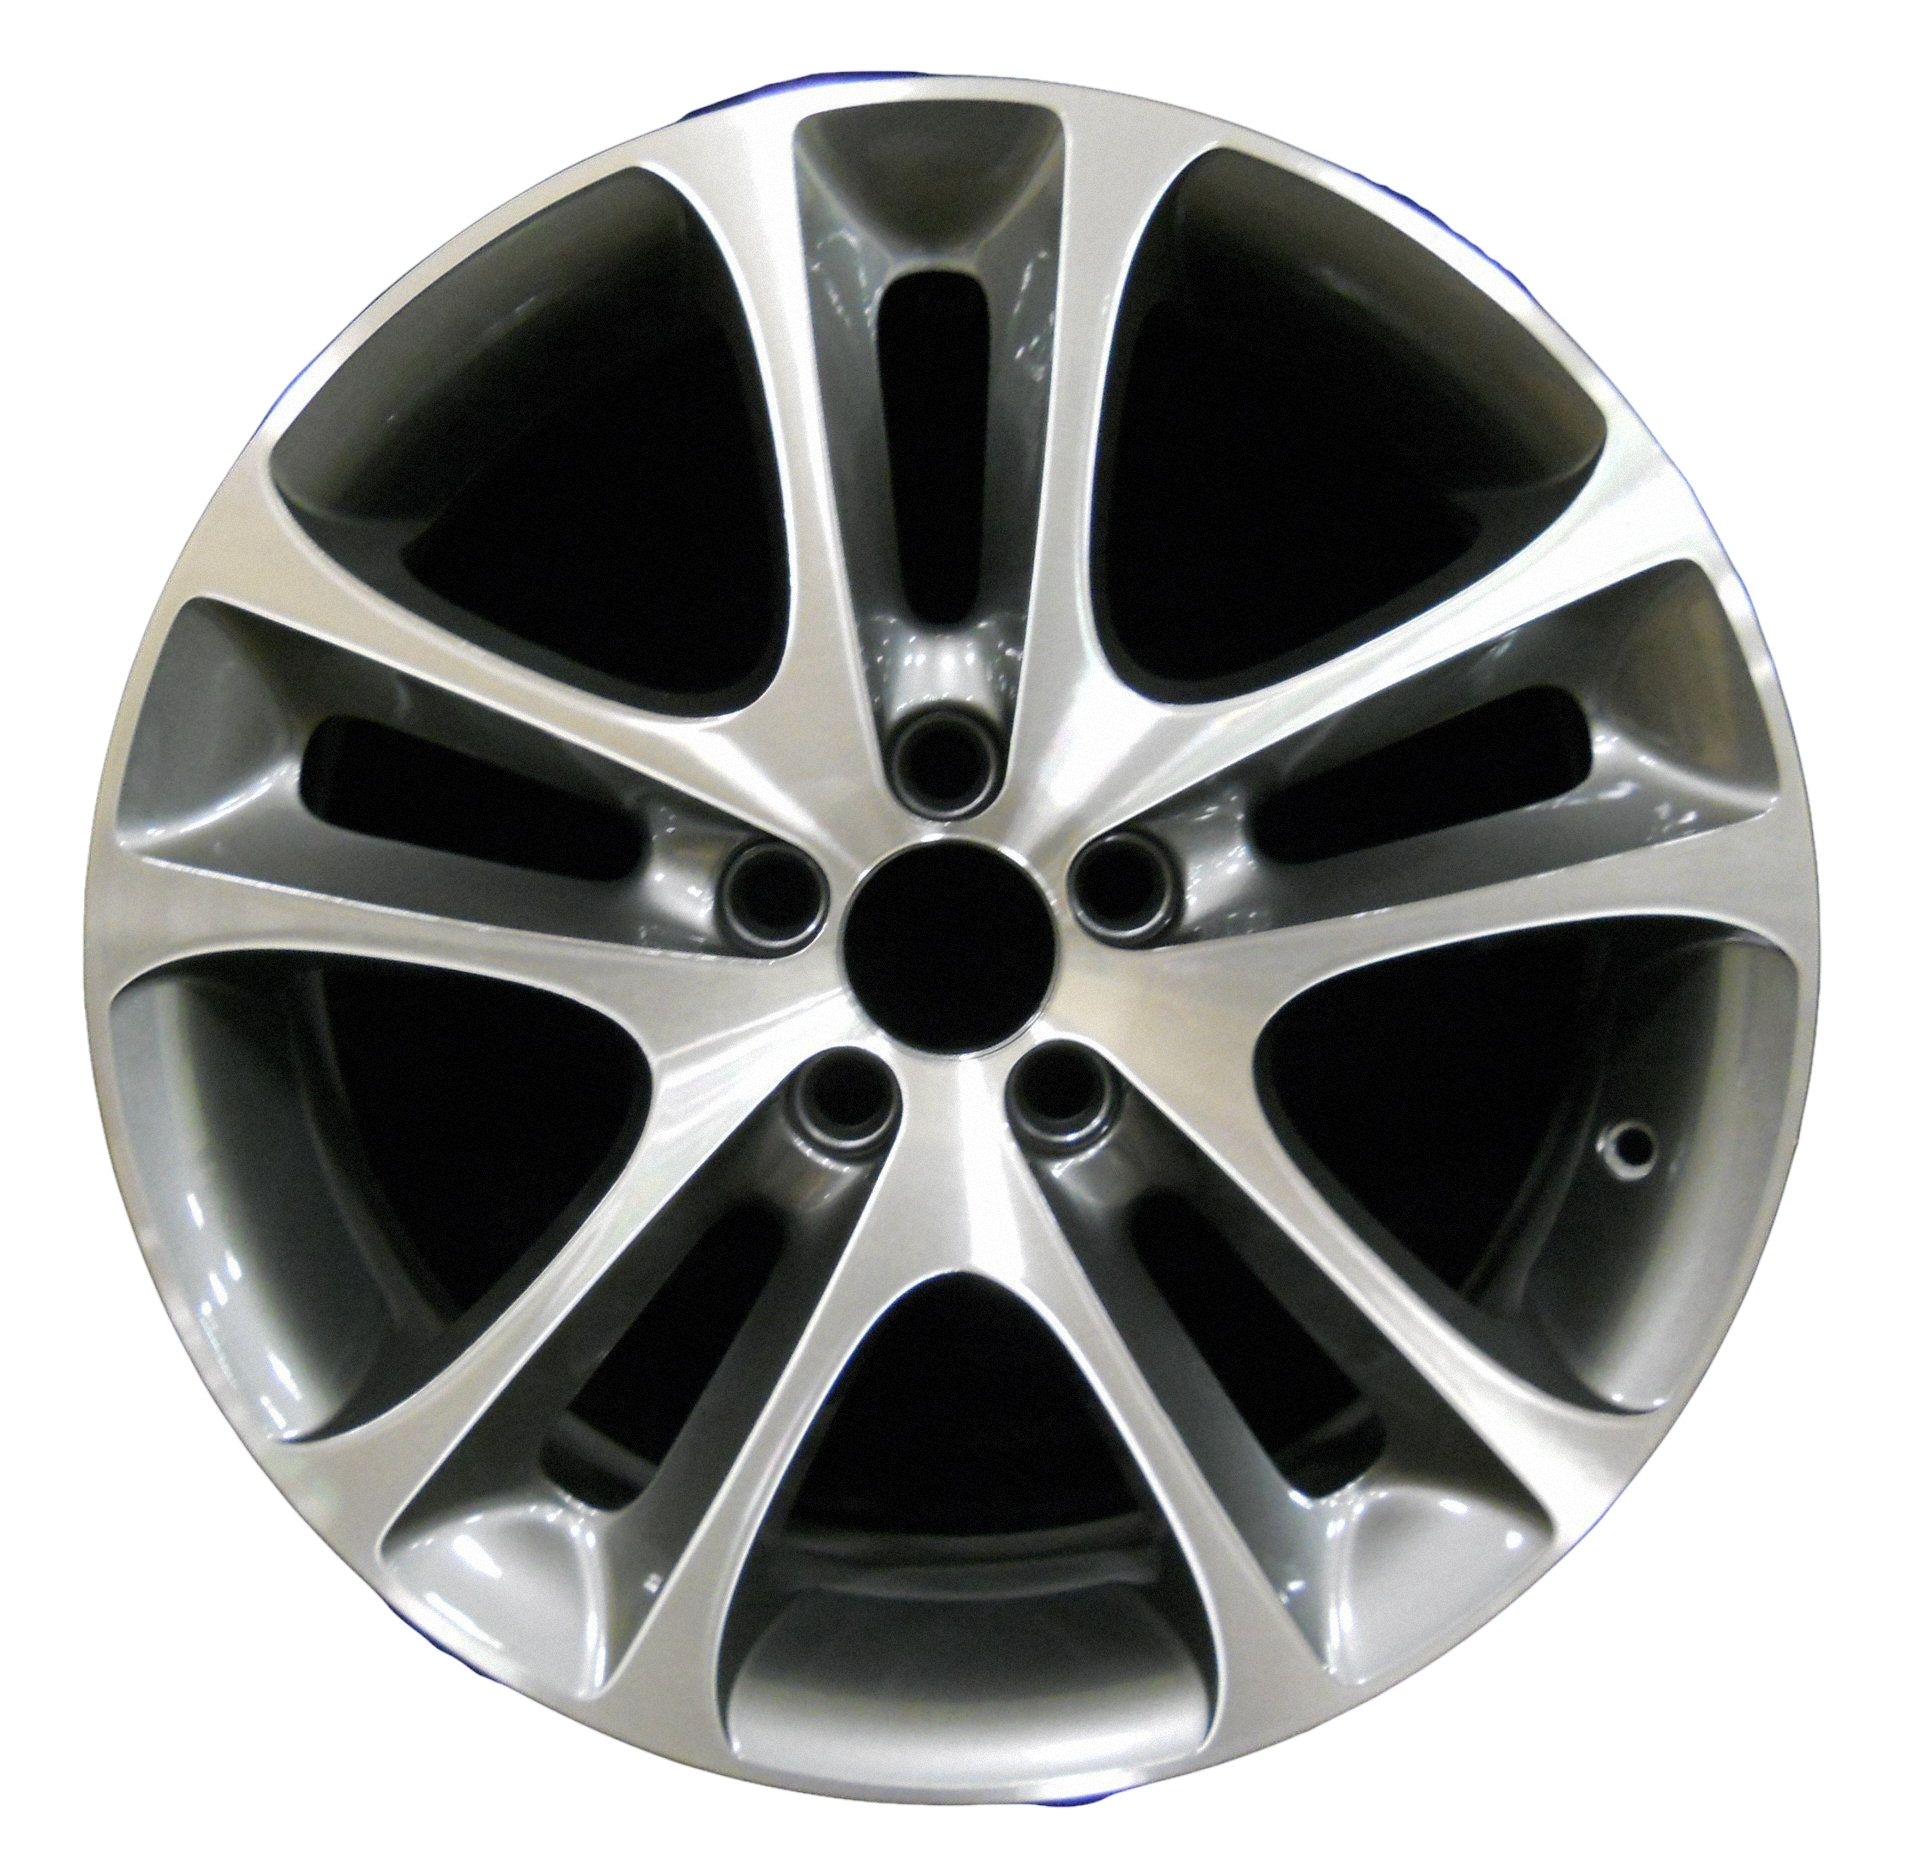 Volvo 30 Series  2009, 2010, 2011 Factory OEM Car Wheel Size 18x7.5 Alloy WAO.70338.LC27.MA